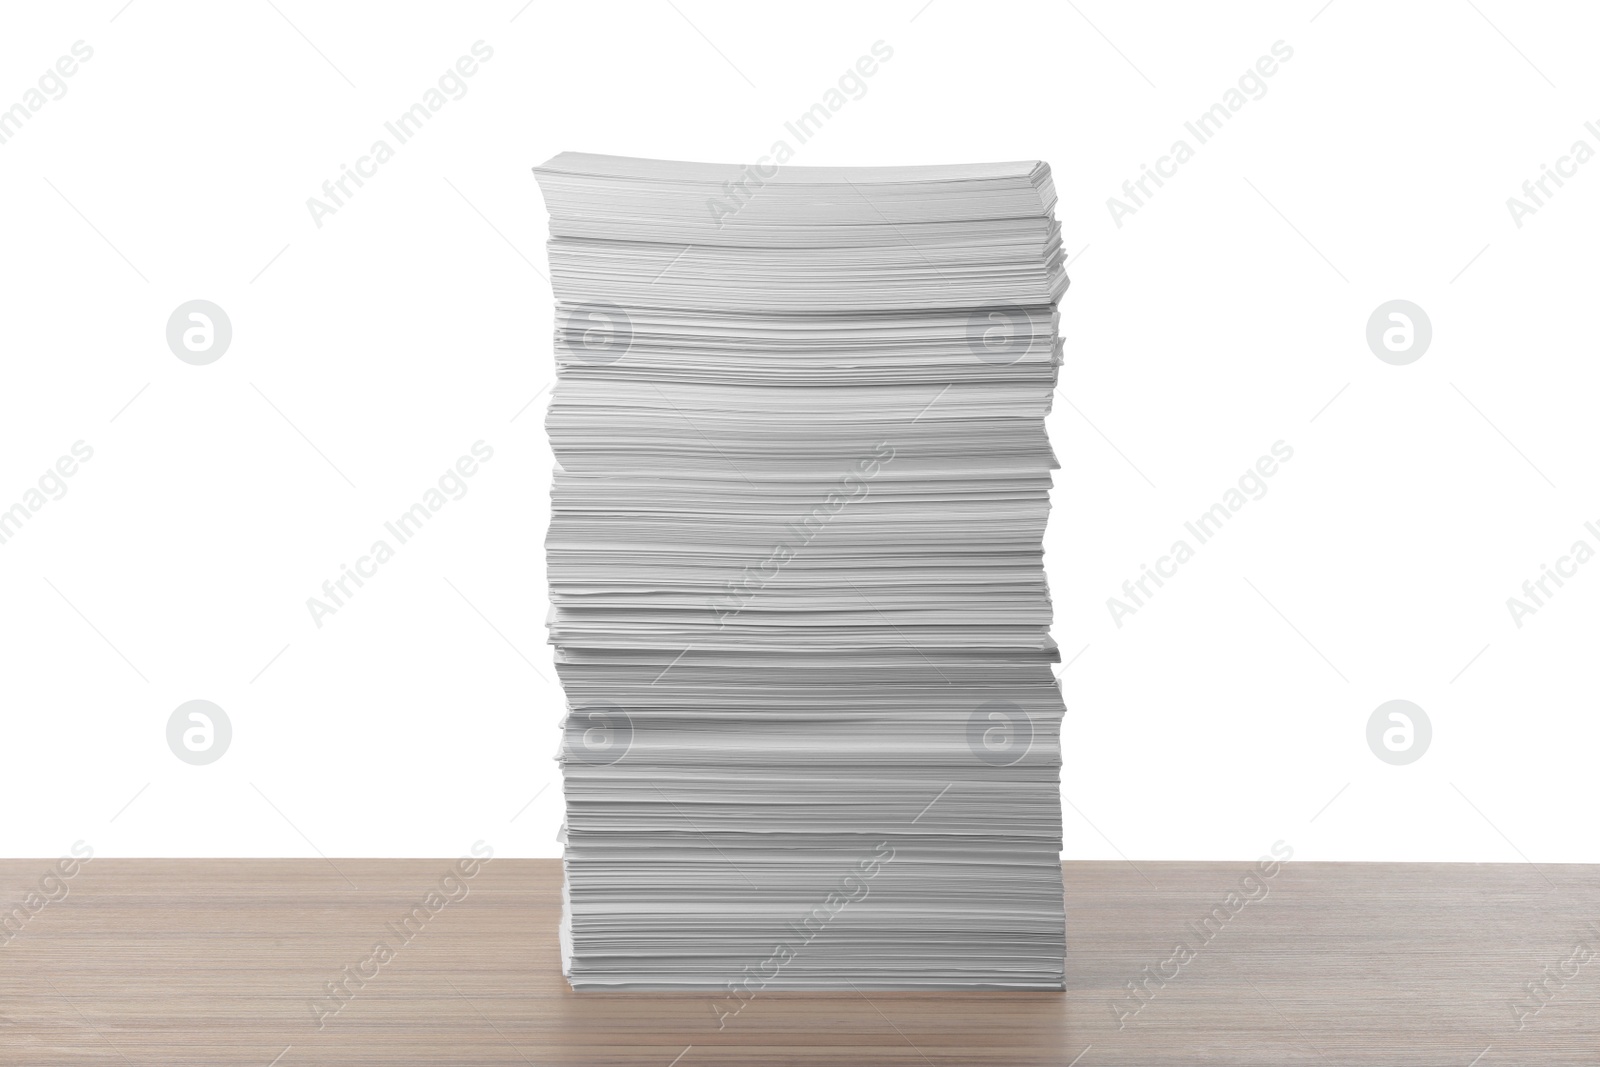 Photo of Stack of paper sheets on wooden table against white background